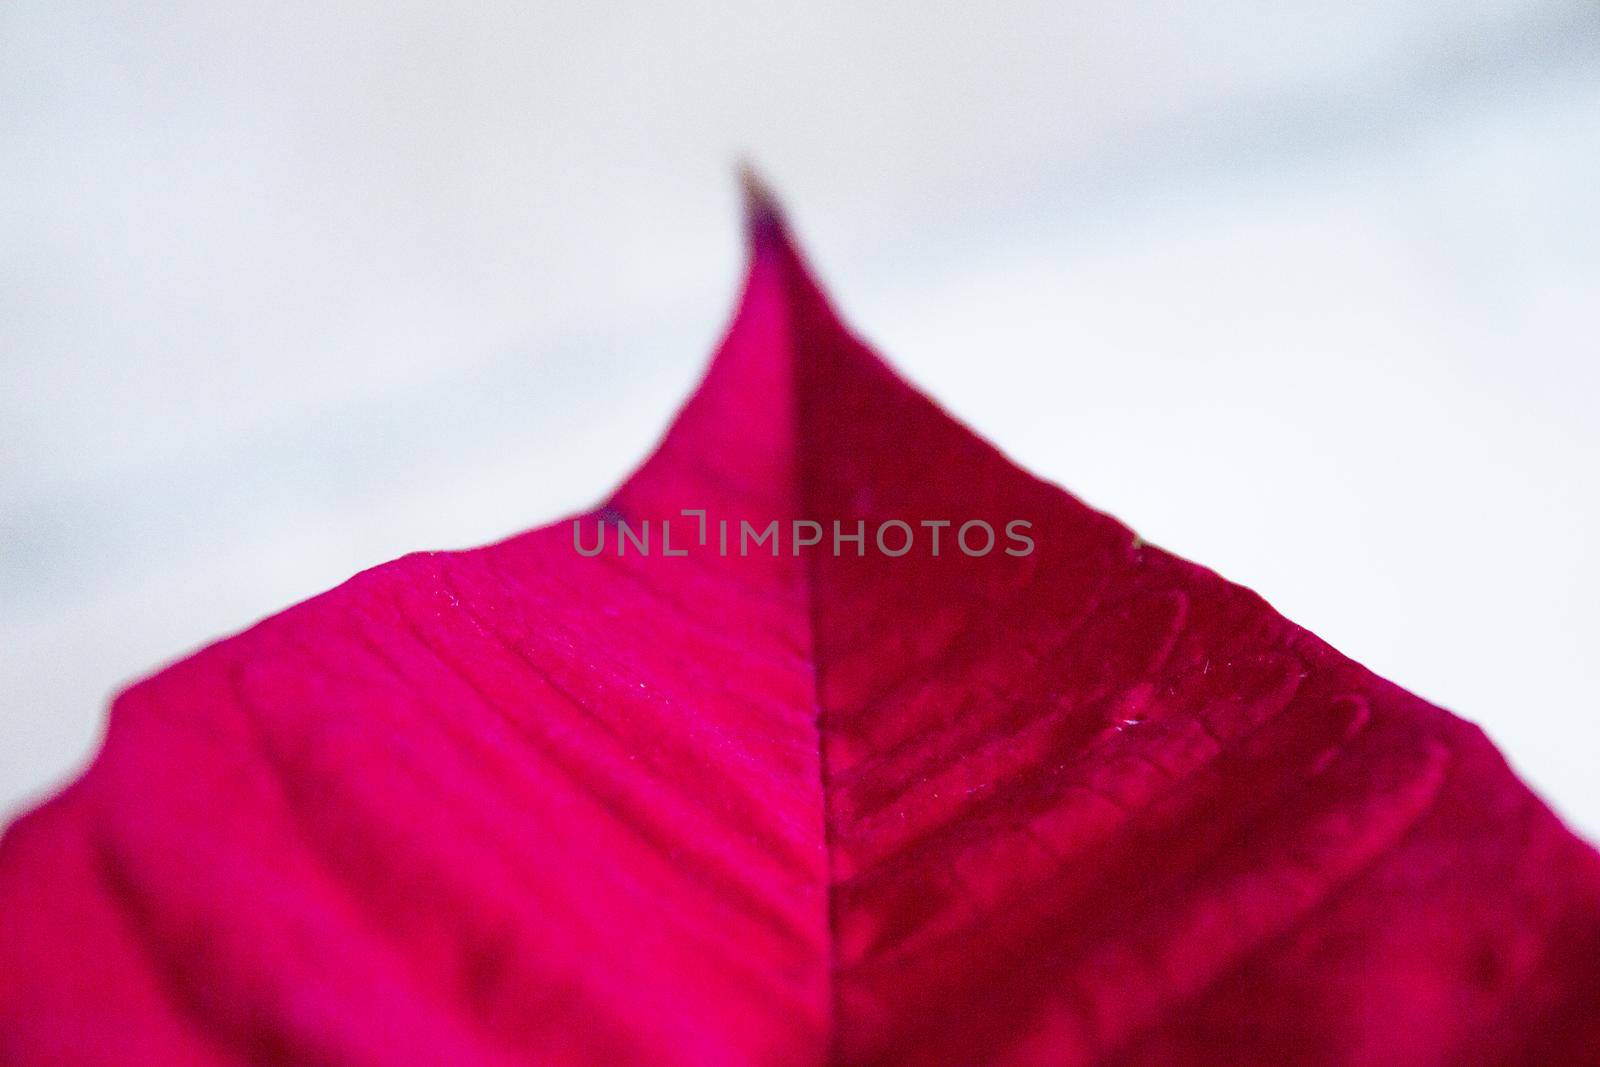 Poinsettia in red. No people. Copy space